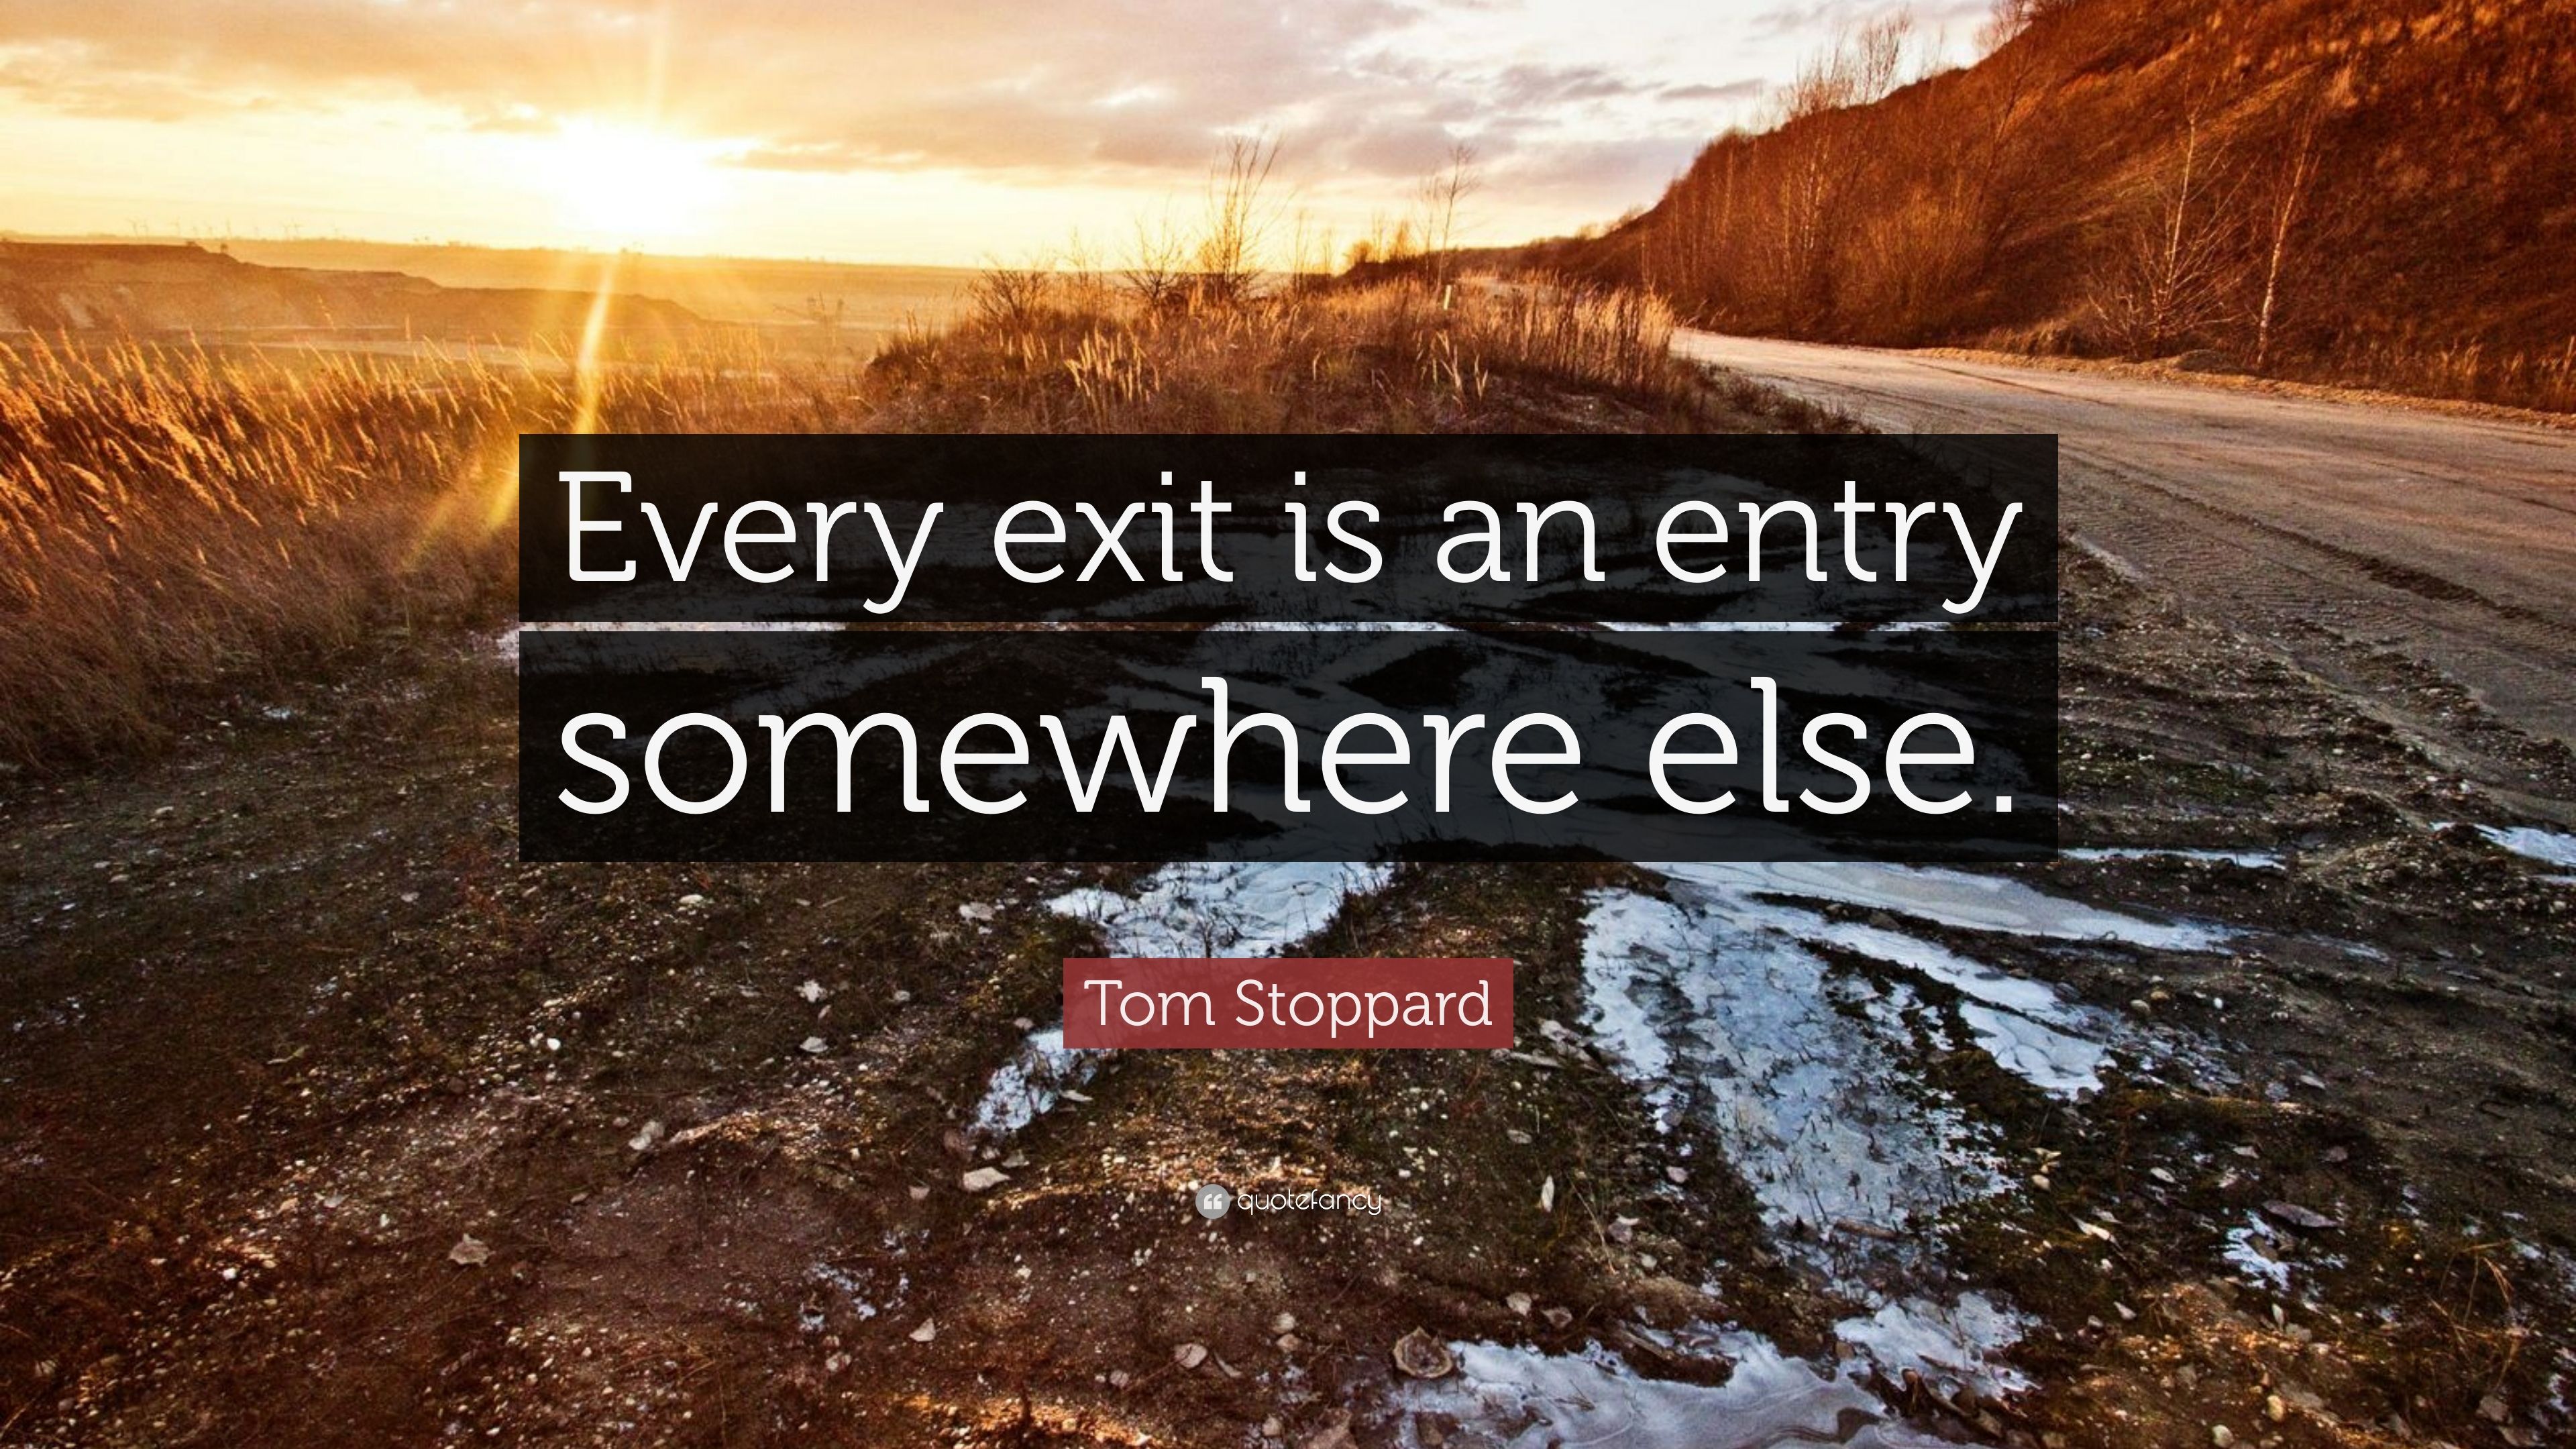 Tom Stoppard Quote: “Every exit is an entry somewhere else.” 4